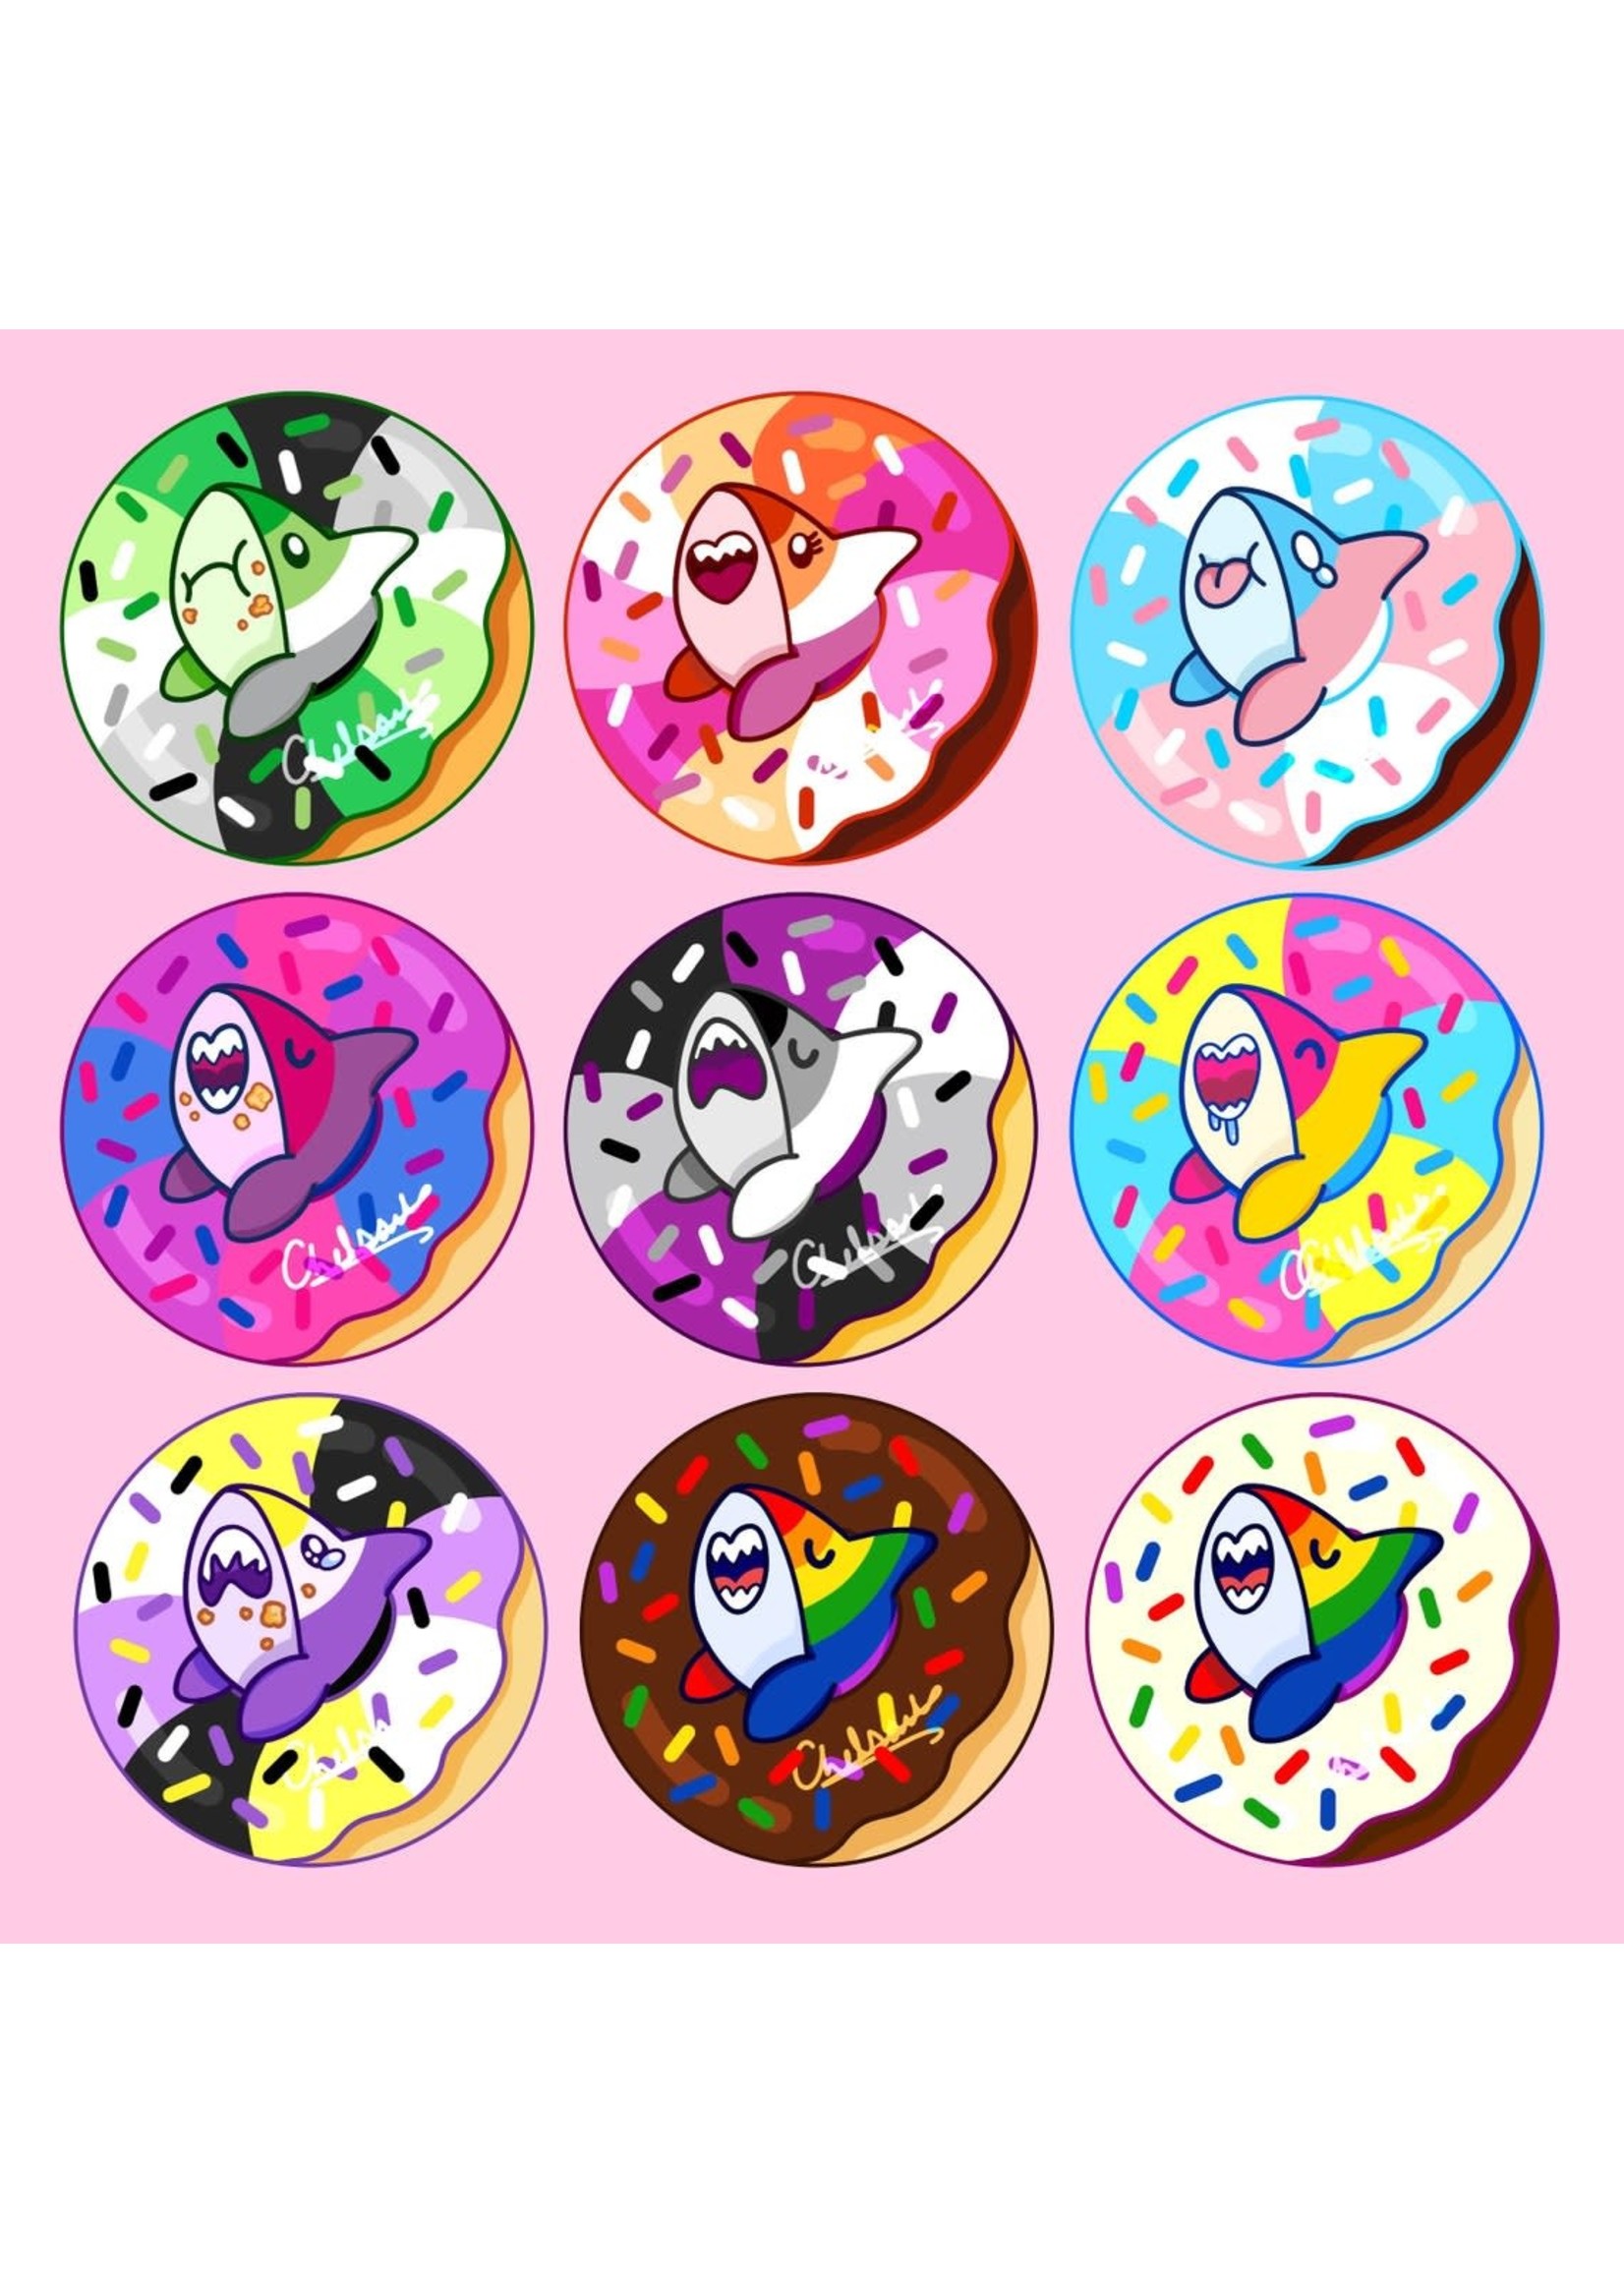 SHARKNDONUTS Pride Sharks and Donut Buttons Asexual